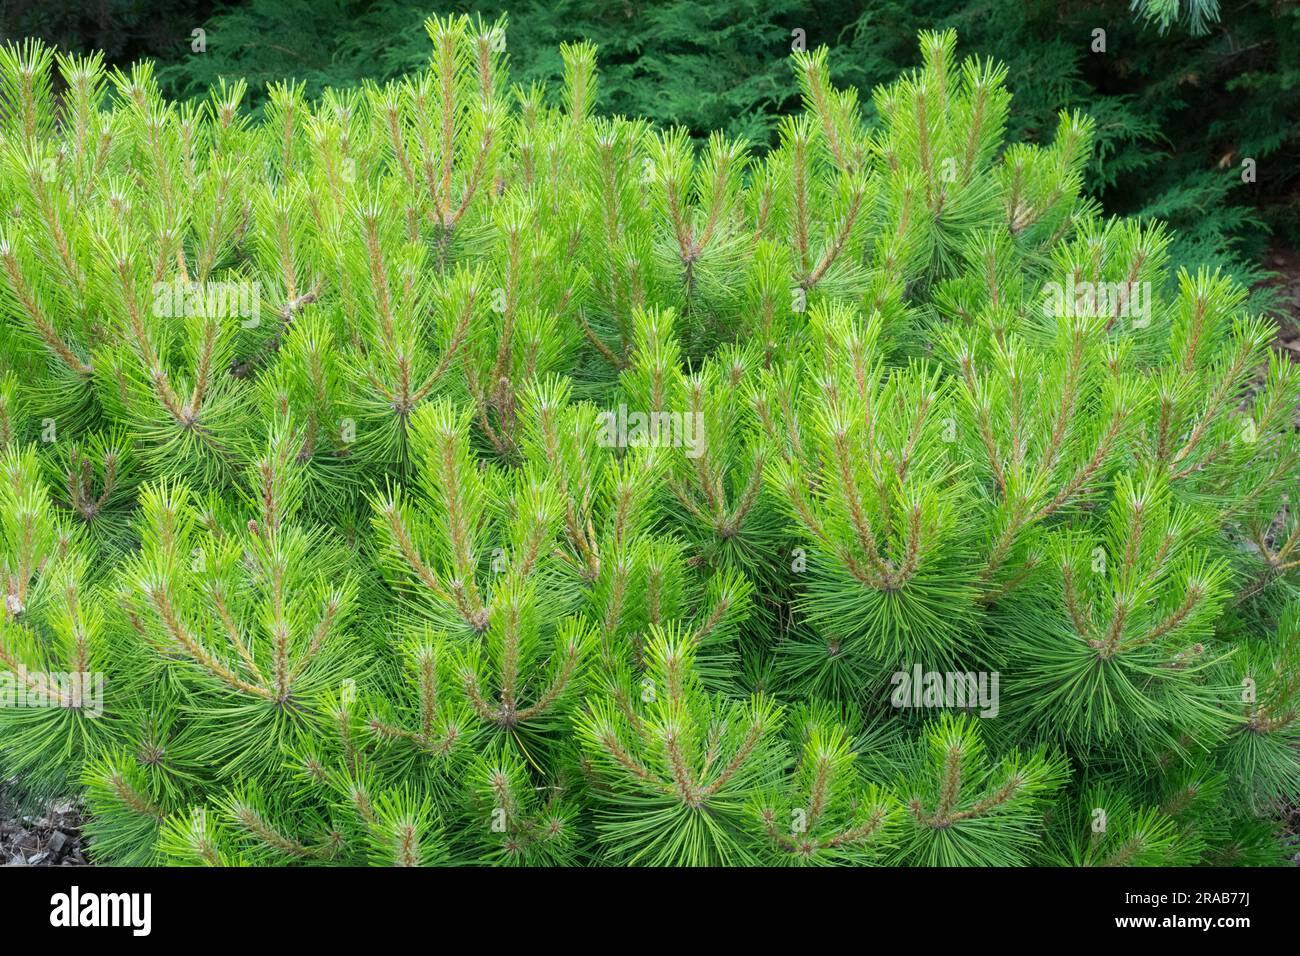 Red Pine, Pinus resinosa 'Don Smith', Needles, Branches, Pine, American Red Pine, Cultivar, Pin Rouge, Garden Pinus foliage Stock Photo